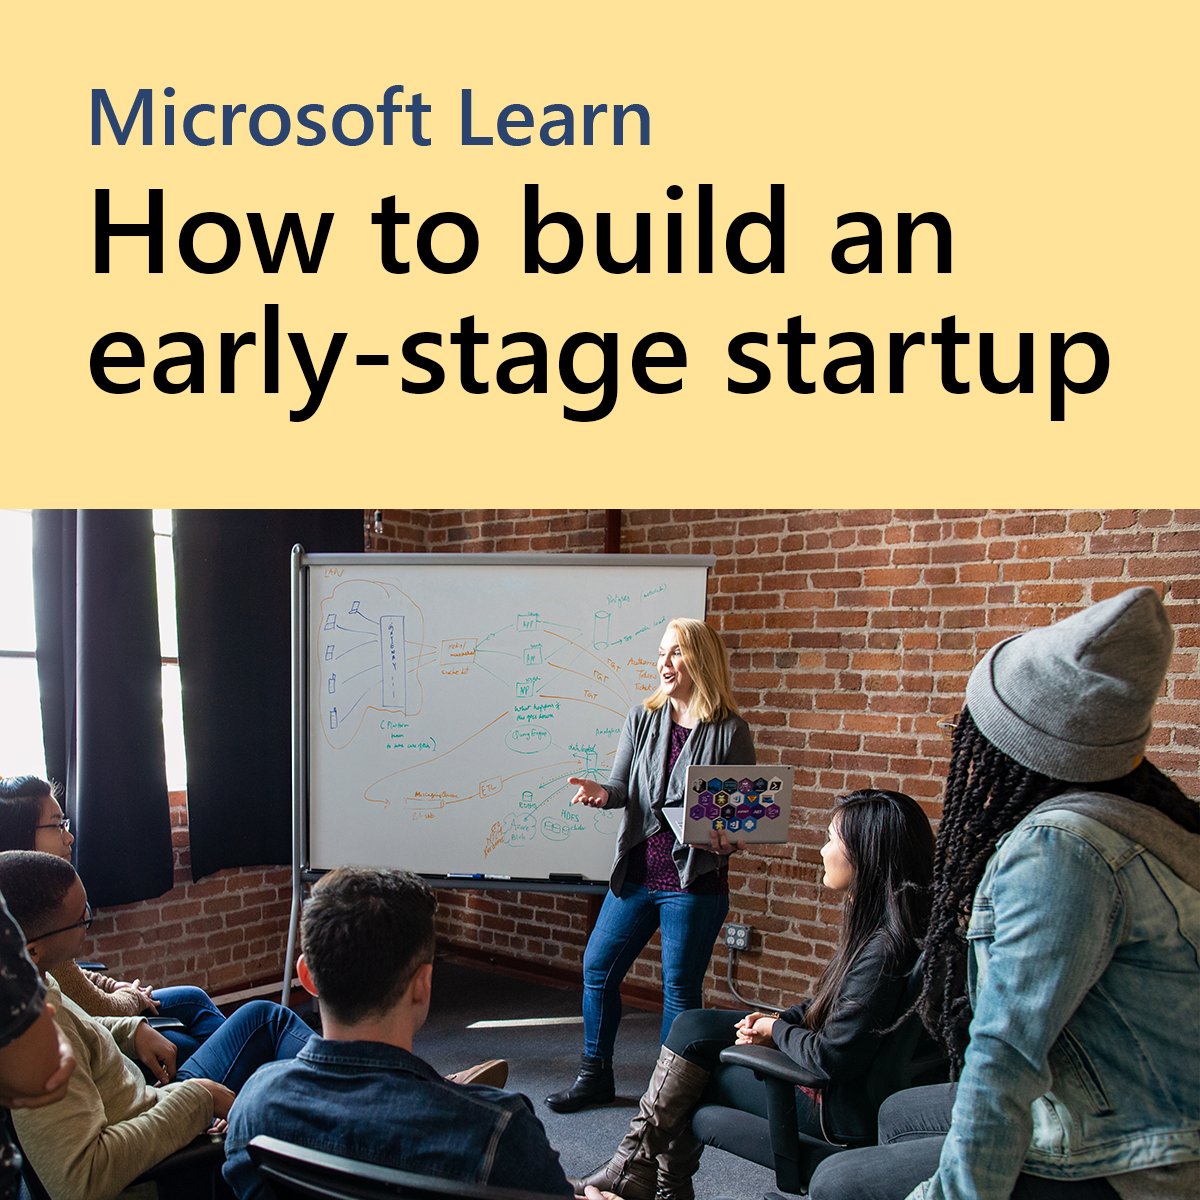 Are you working on an idea for a startup? This @MicrosoftLearn path will guide you through the core business concepts you need to know to launch a successful startup. msft.it/6019YB4Hd